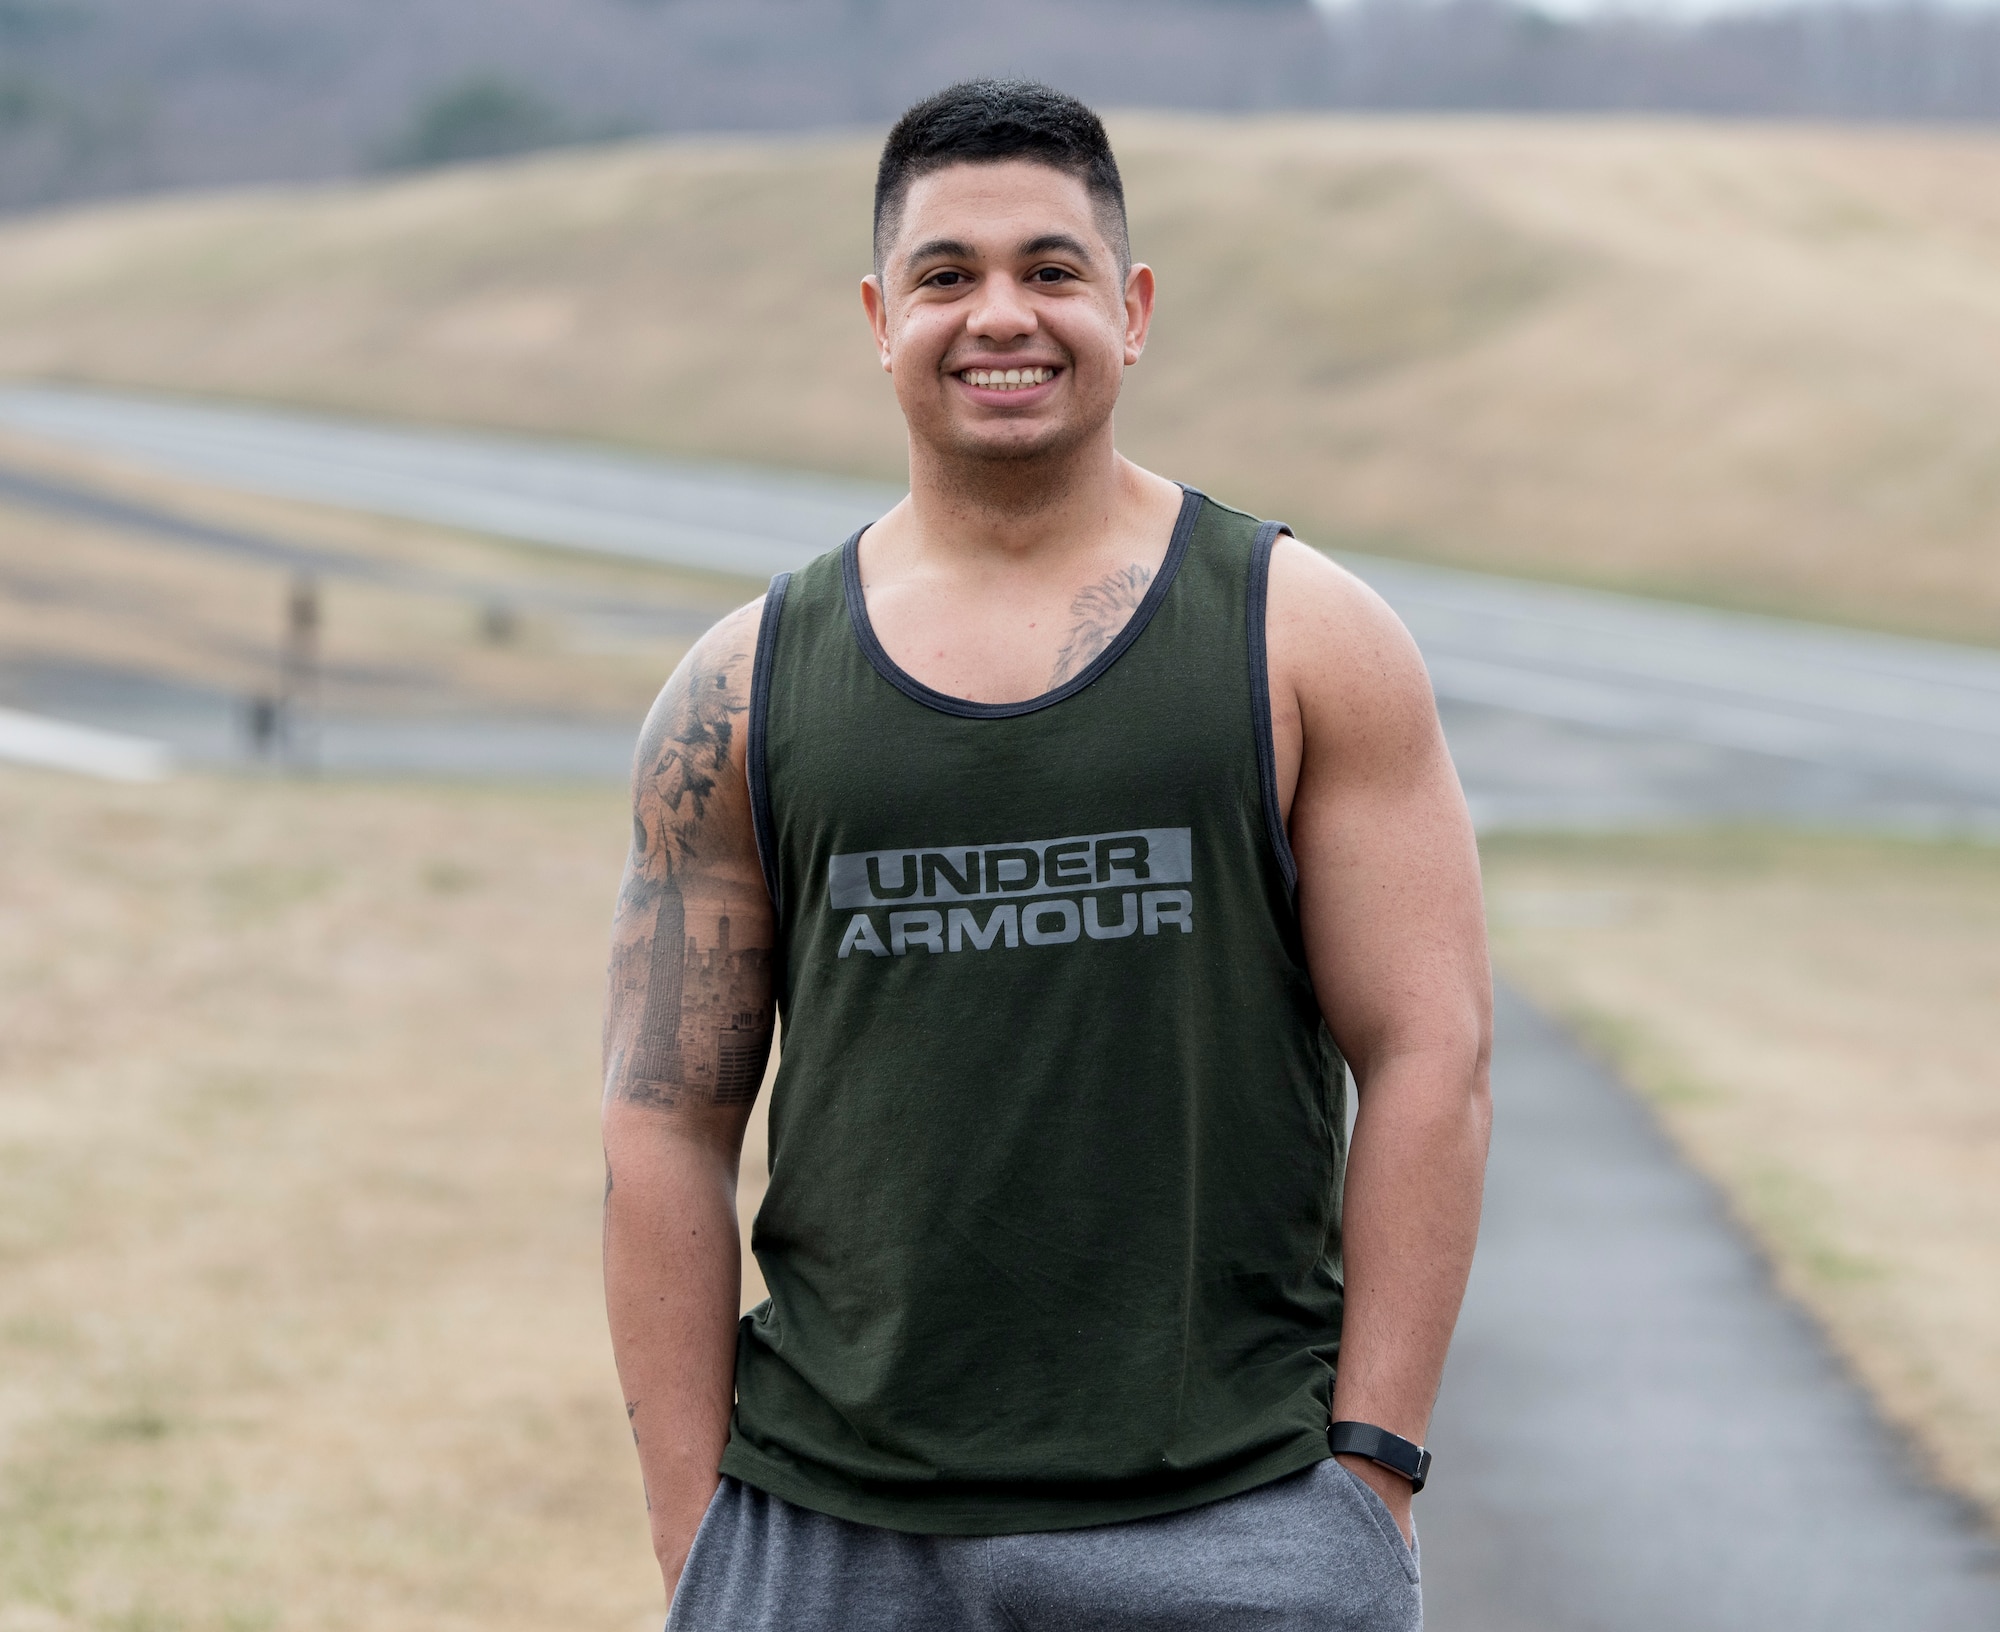 U.S. Air Force 1st Lt. Jeremy E. Garcia, a 35th Fighter Wing public affairs officer, smiles for the camera before he begins his 5-mile run through Misawa Air Base. He began running to redefine his identity and turn himself into a better leader for his Airmen. He used running as a tool to develop mental resiliency. (U.S. Air Force photo by Staff Sgt. Brittany A. Chase)